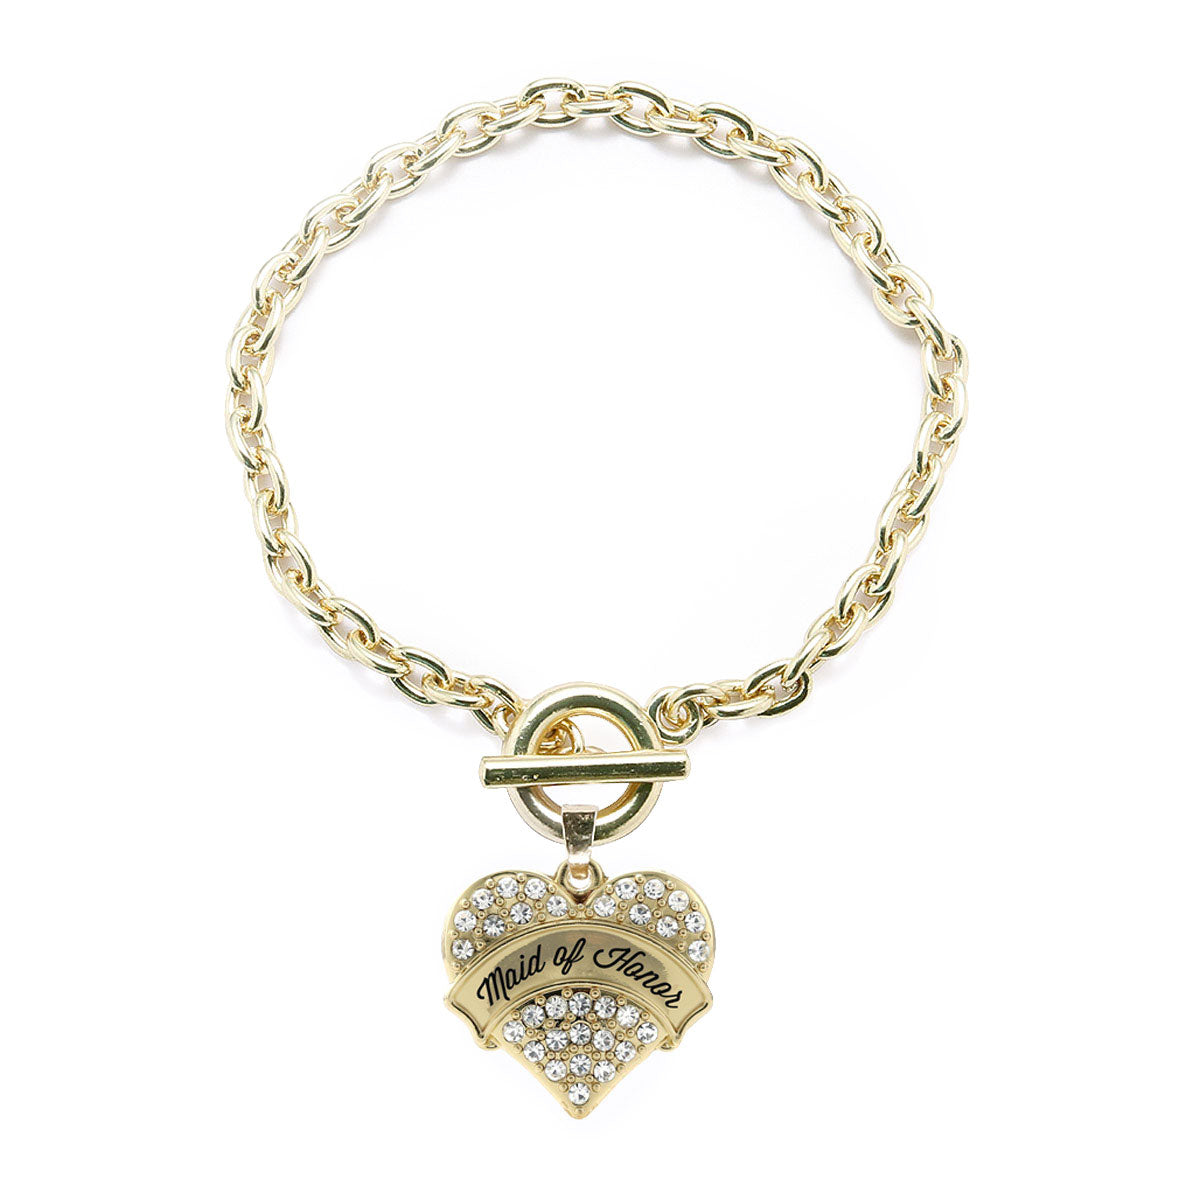 Gold Clear Maid of Honor Pave Heart Charm Toggle Bracelet